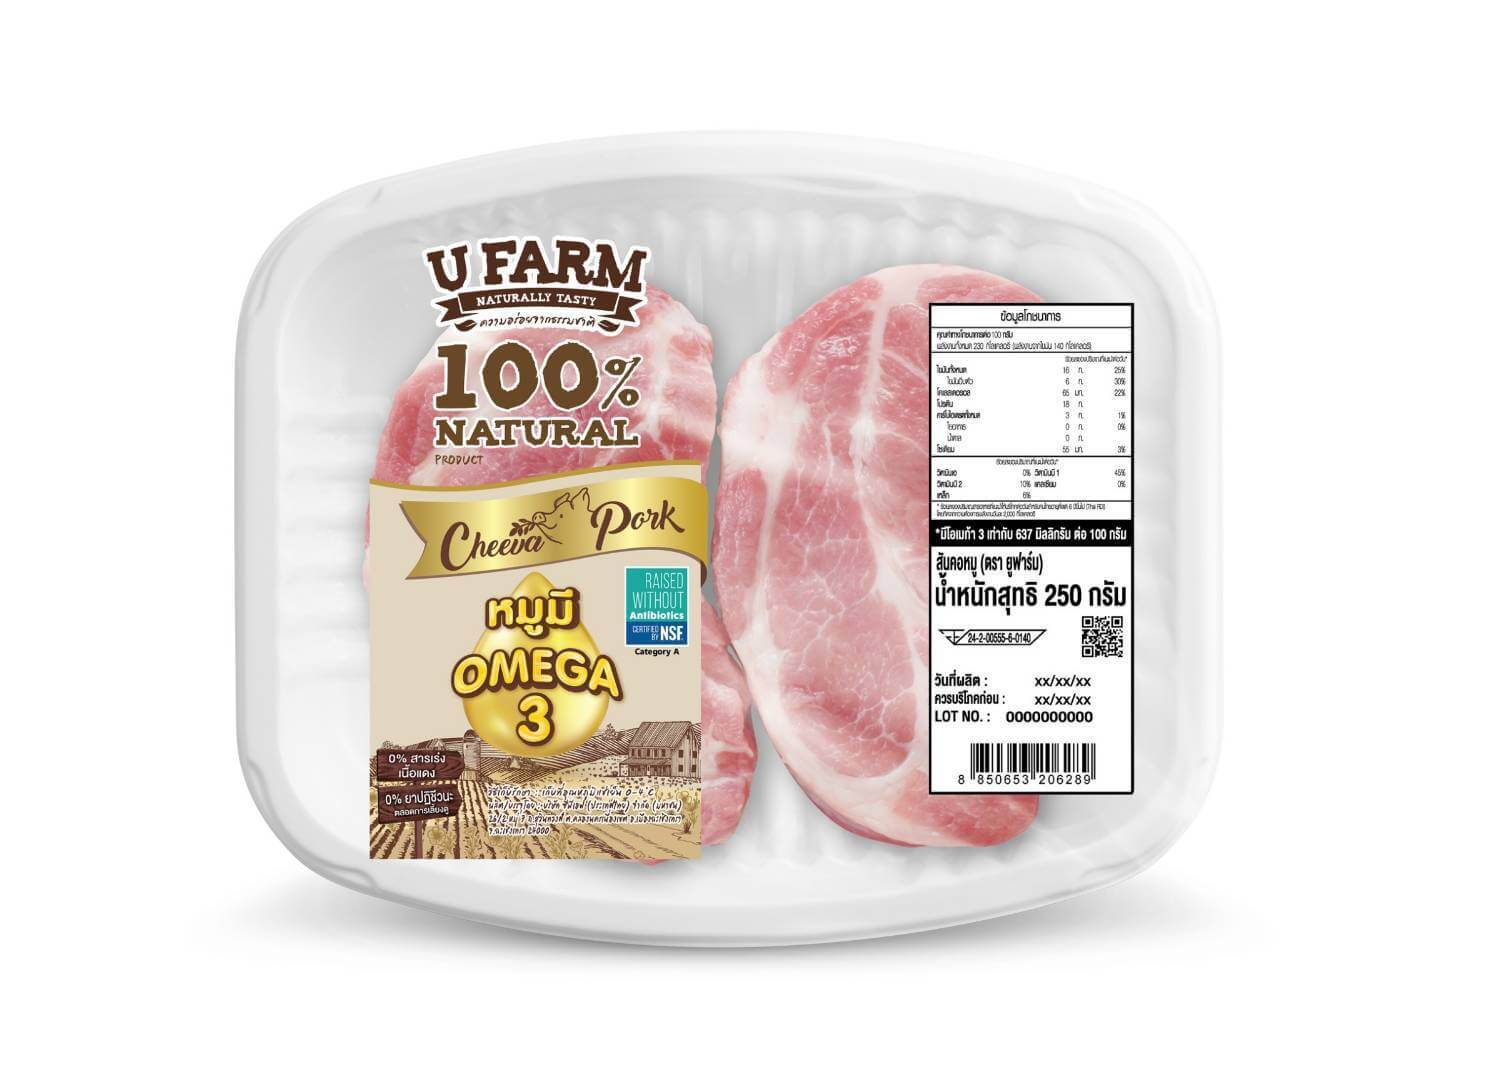 U Farm unveils "Cheeva Pork", novel meat enriched with good fatty acids and omega-3  The award-winning health food innovation from THAIFEX - Anuga Asia 2020